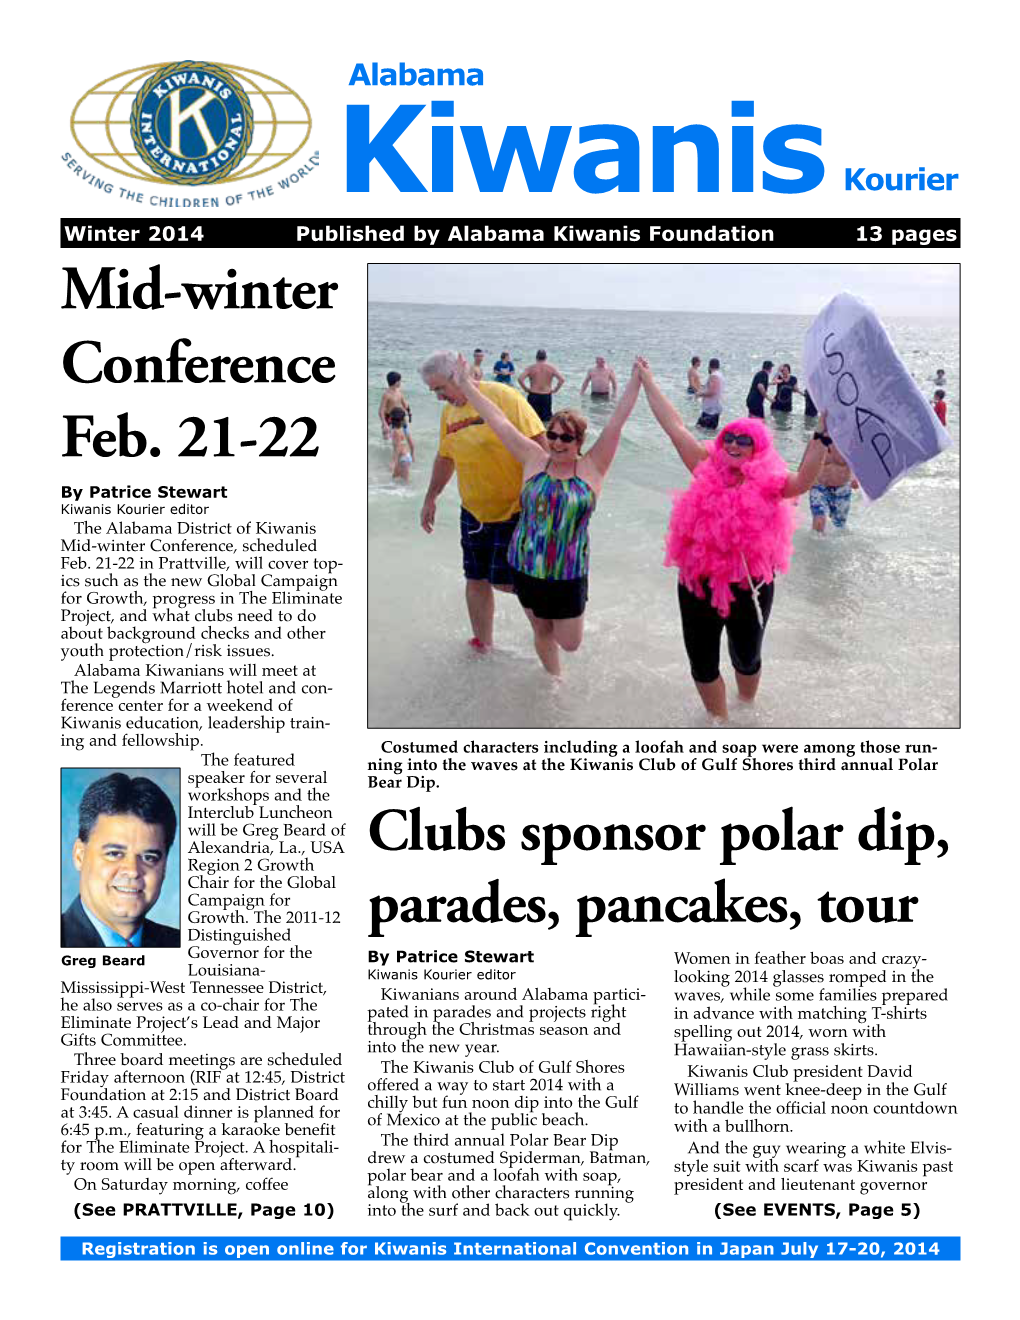 Alabama District Kiwanis Foundation That Have Not Yet Been Reported